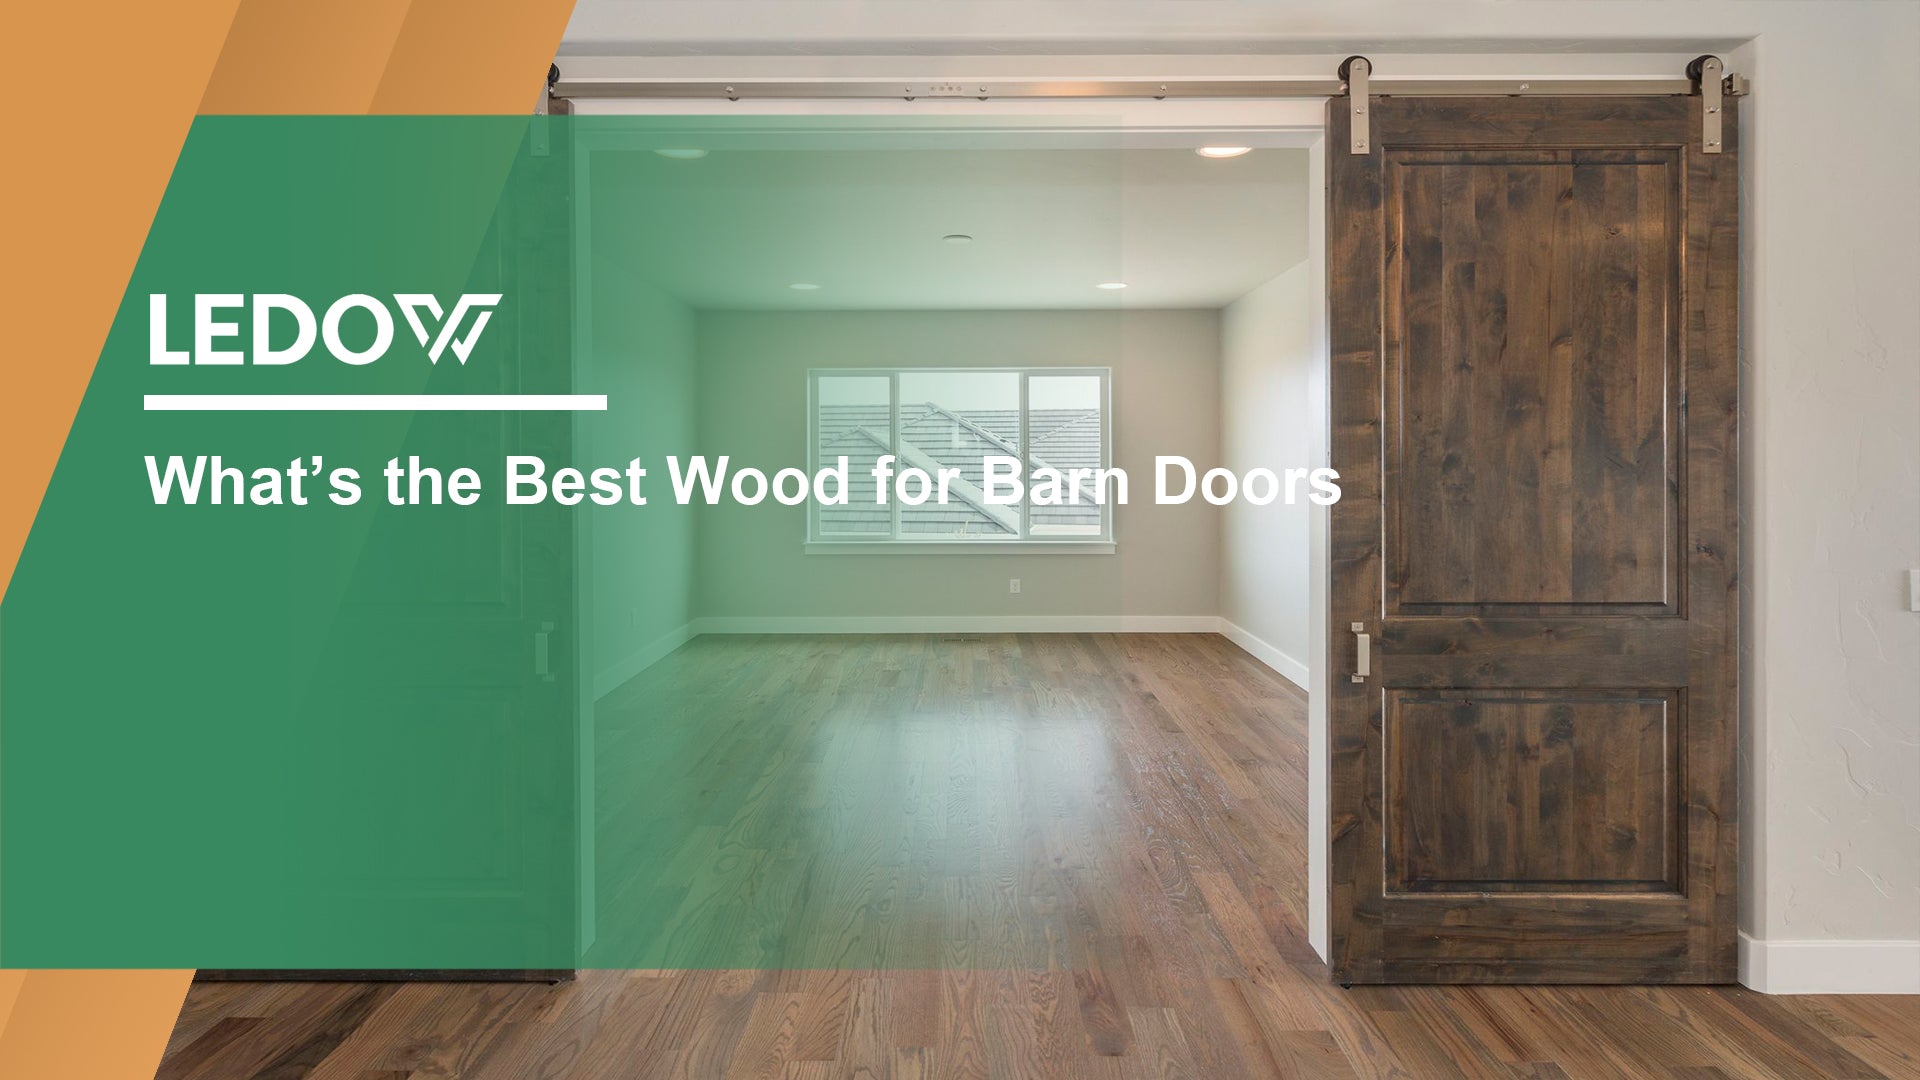 What’s the Best Wood for Barn Doors?